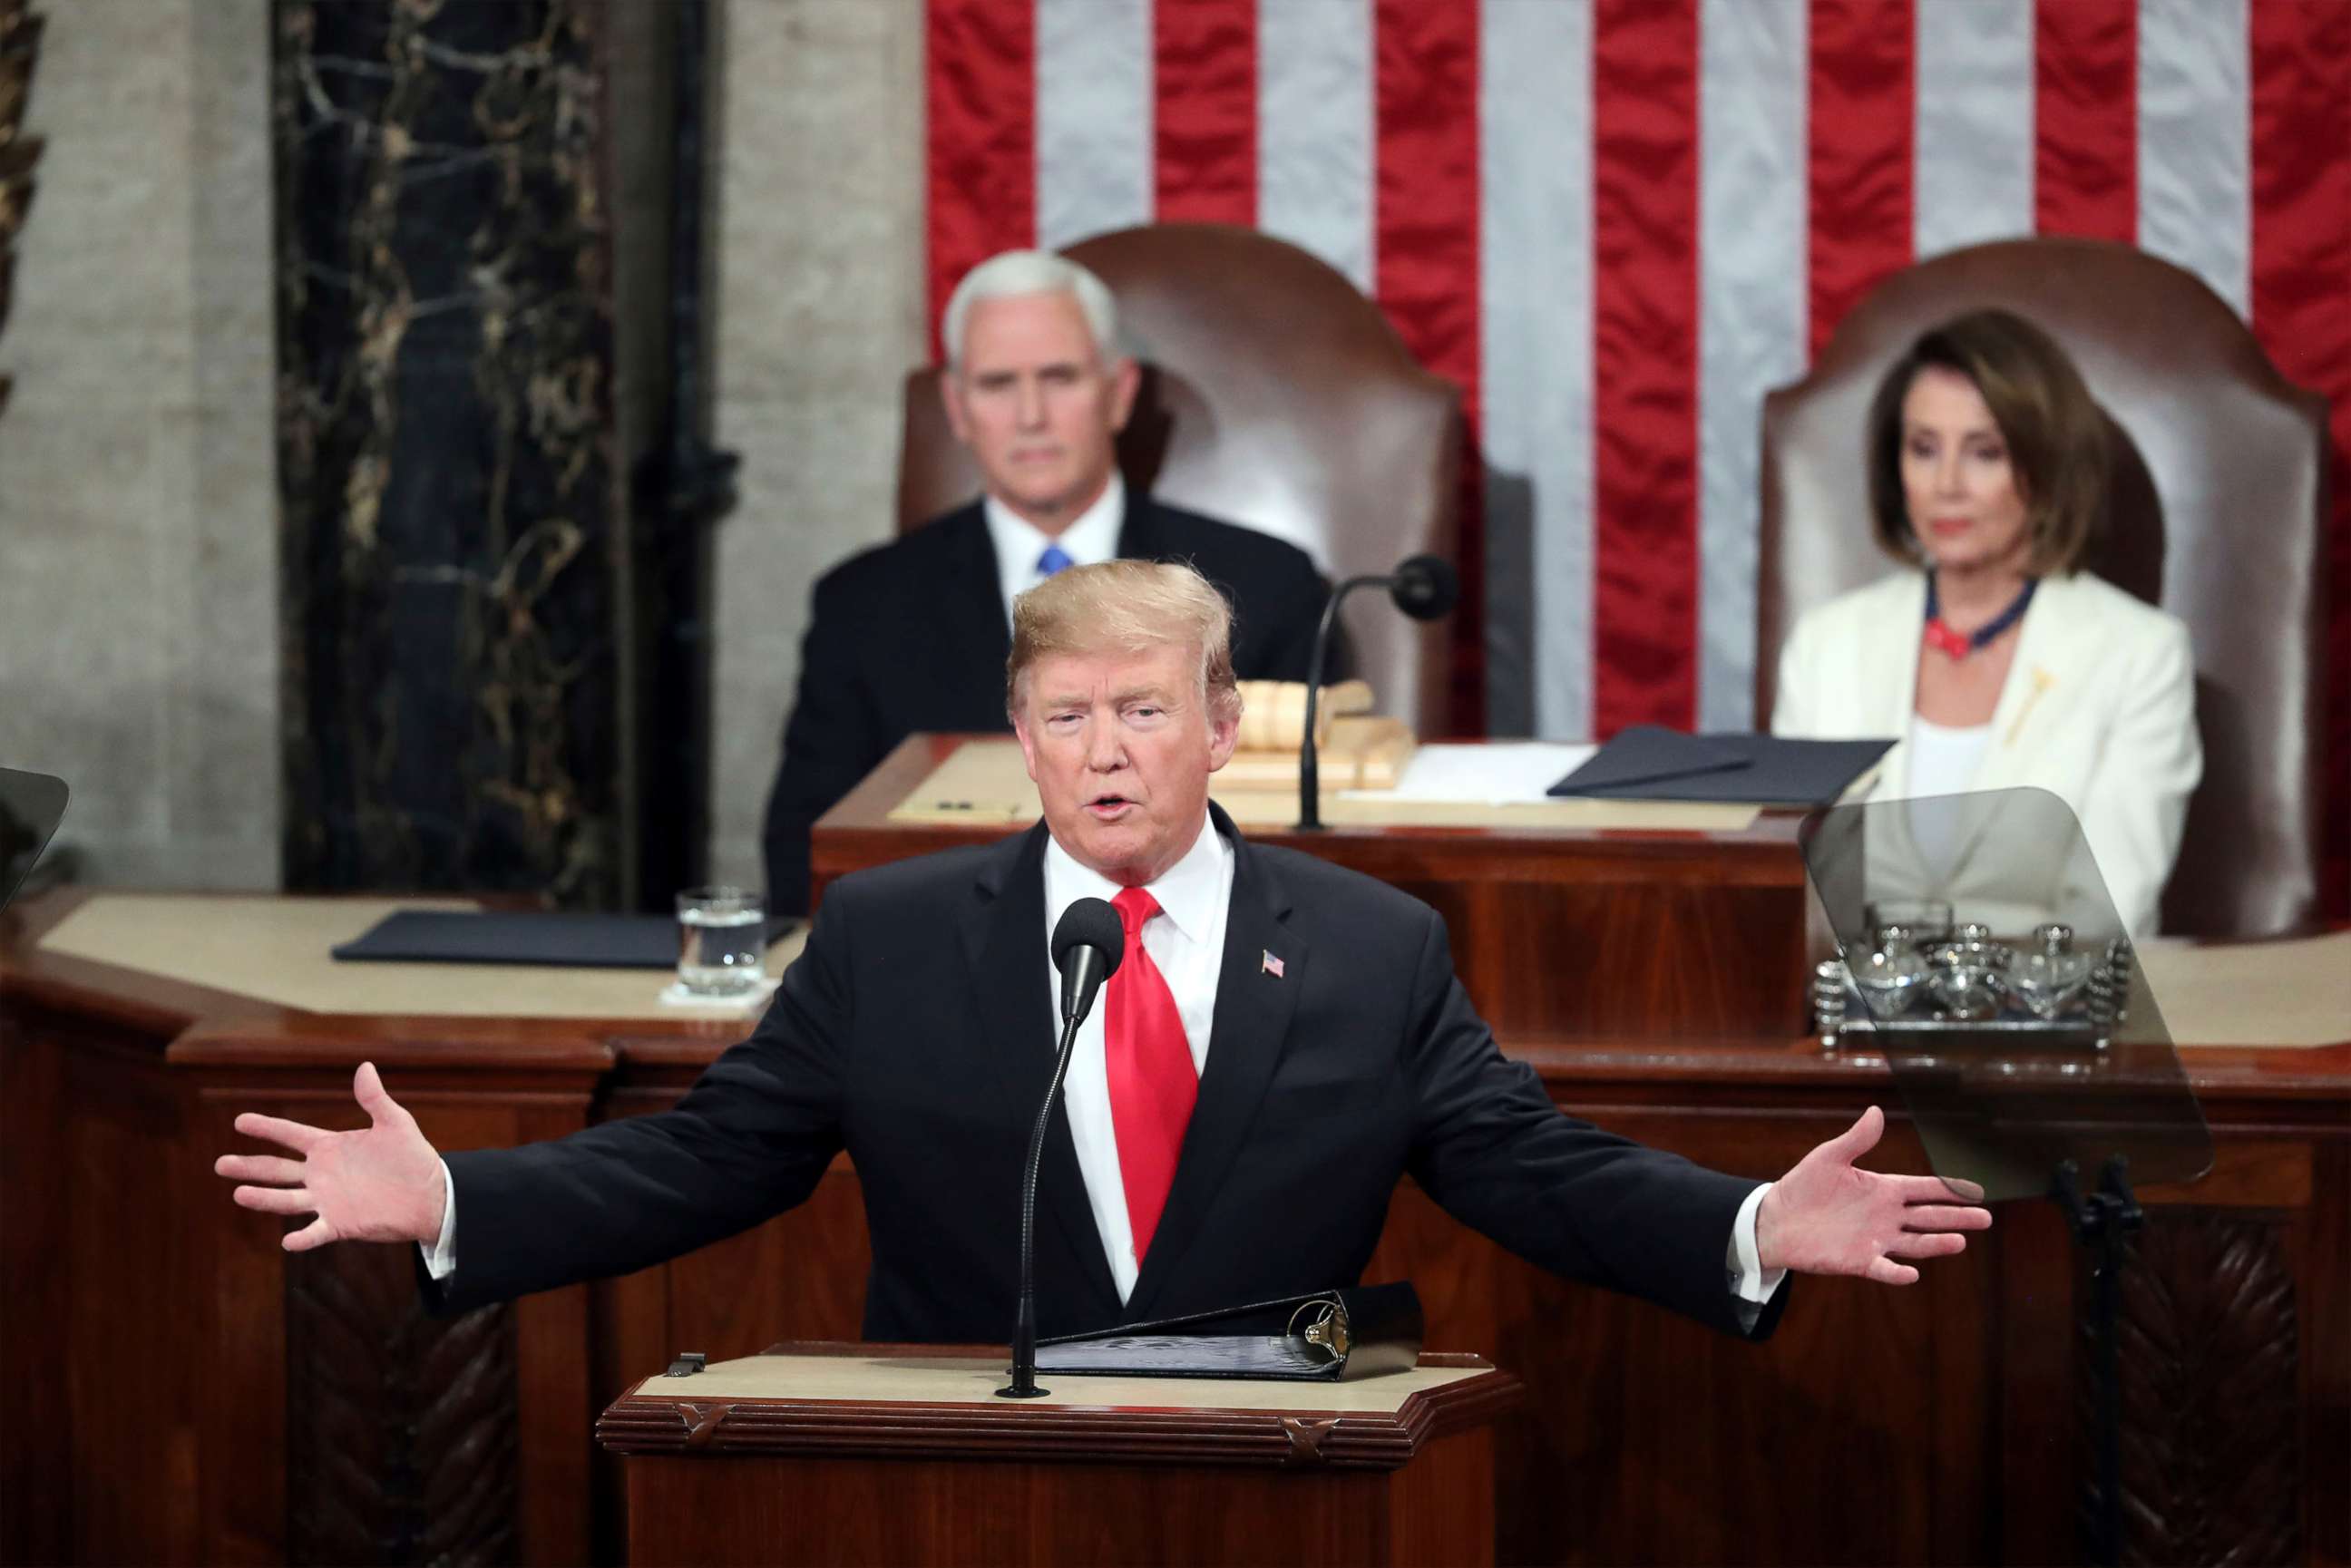 PHOTO: In this Feb. 5, 2019, file photo, President Donald Trump delivers his State of the Union address to a joint session of Congress on Capitol Hill in Washington.